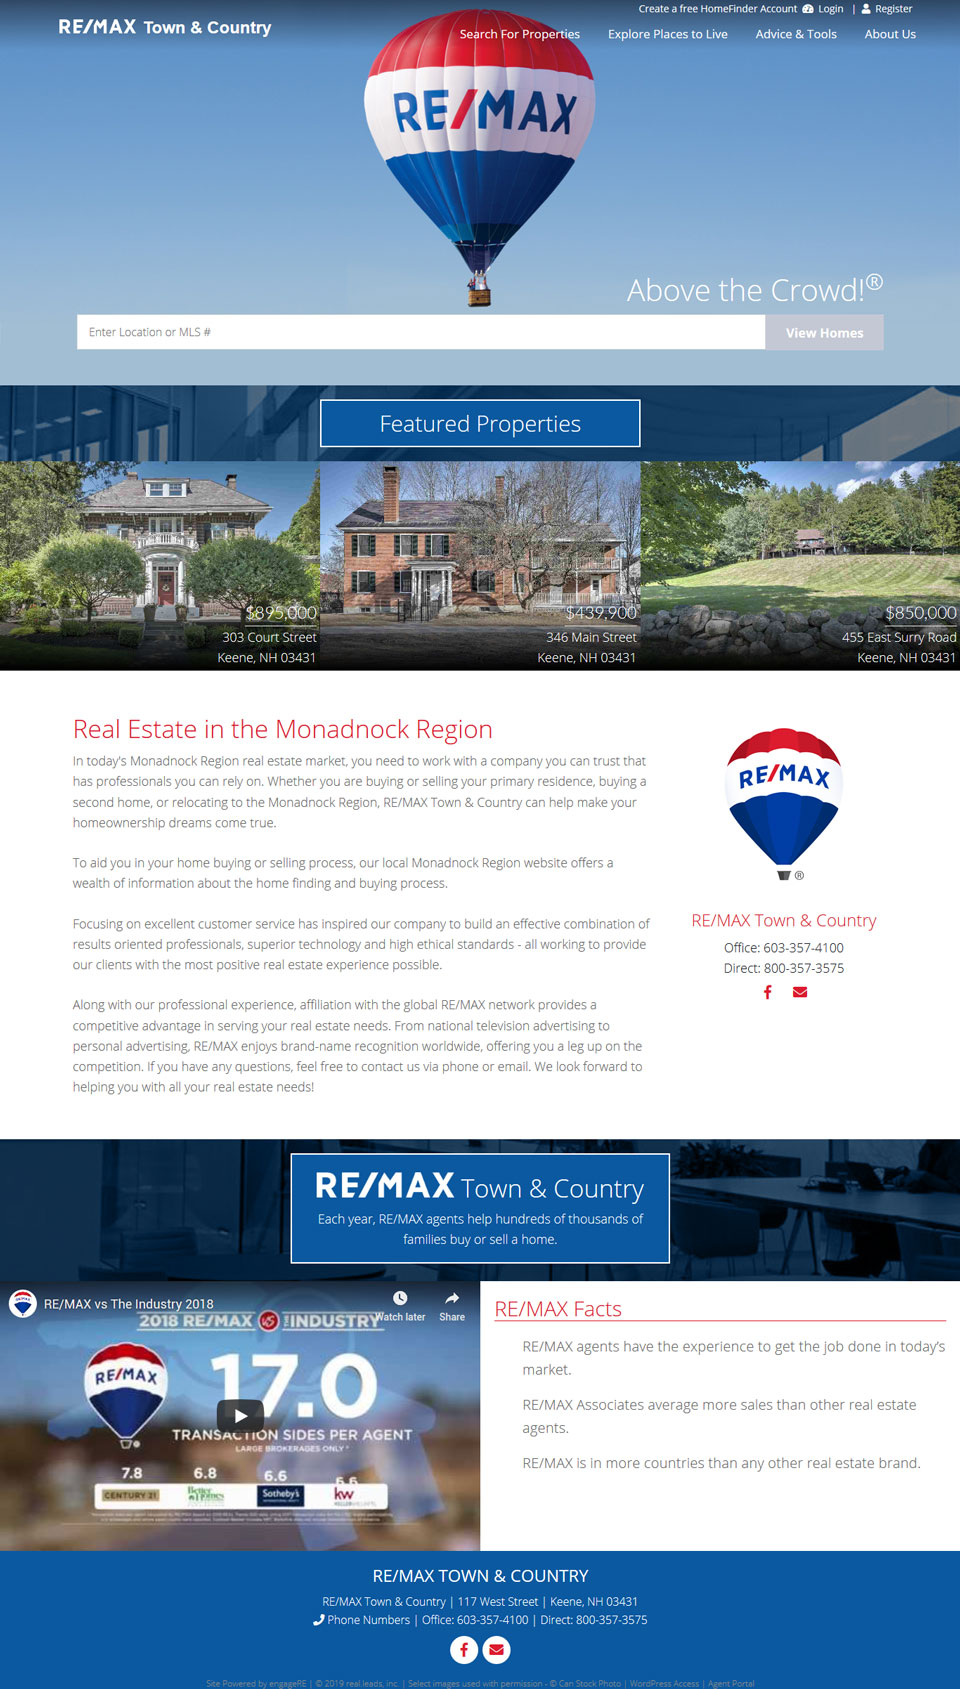 RE/MAX Town & Country website